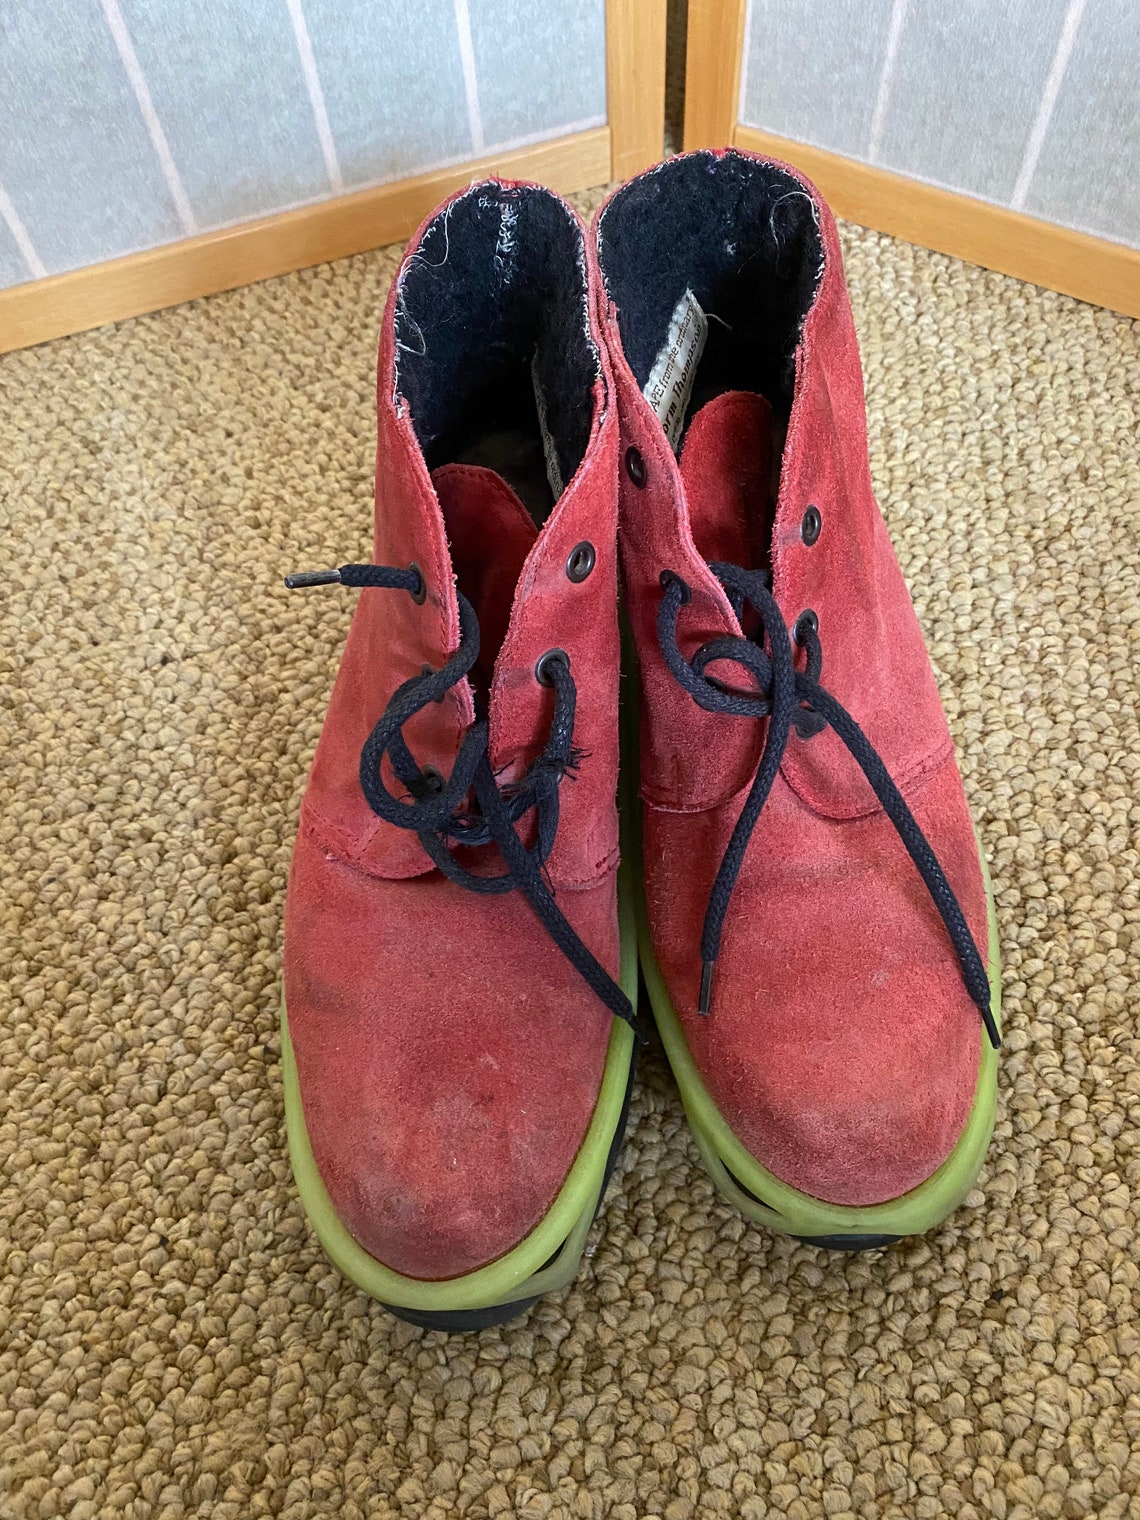 Vintage 1970s Red Suede Norm Thompson Ankle Boots With Lime | Etsy